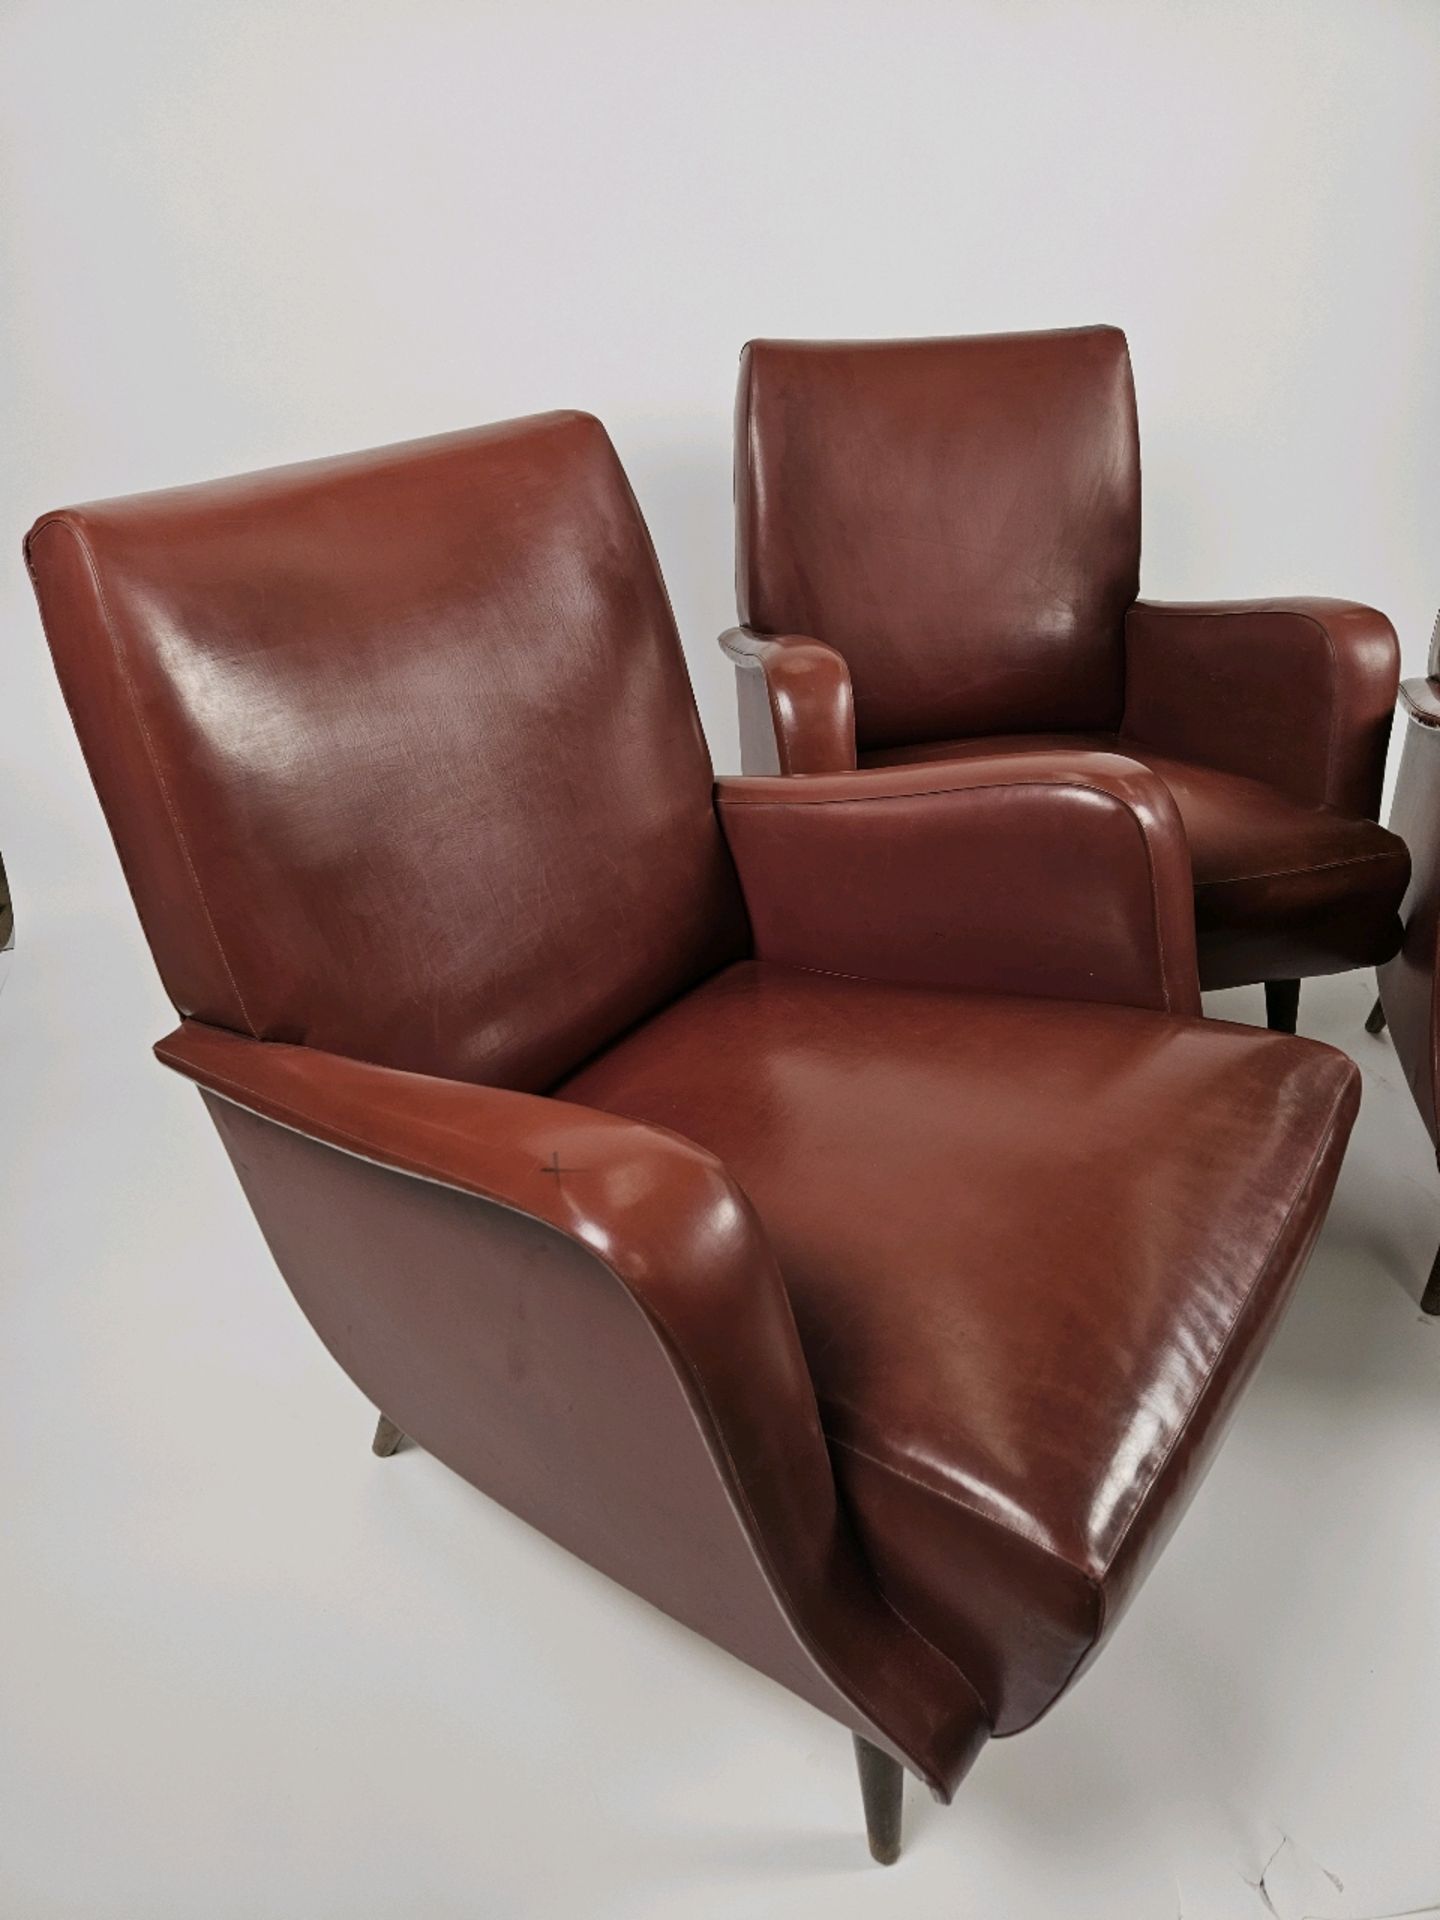 Trio of Faux Leather Accent Chairs - Image 5 of 7